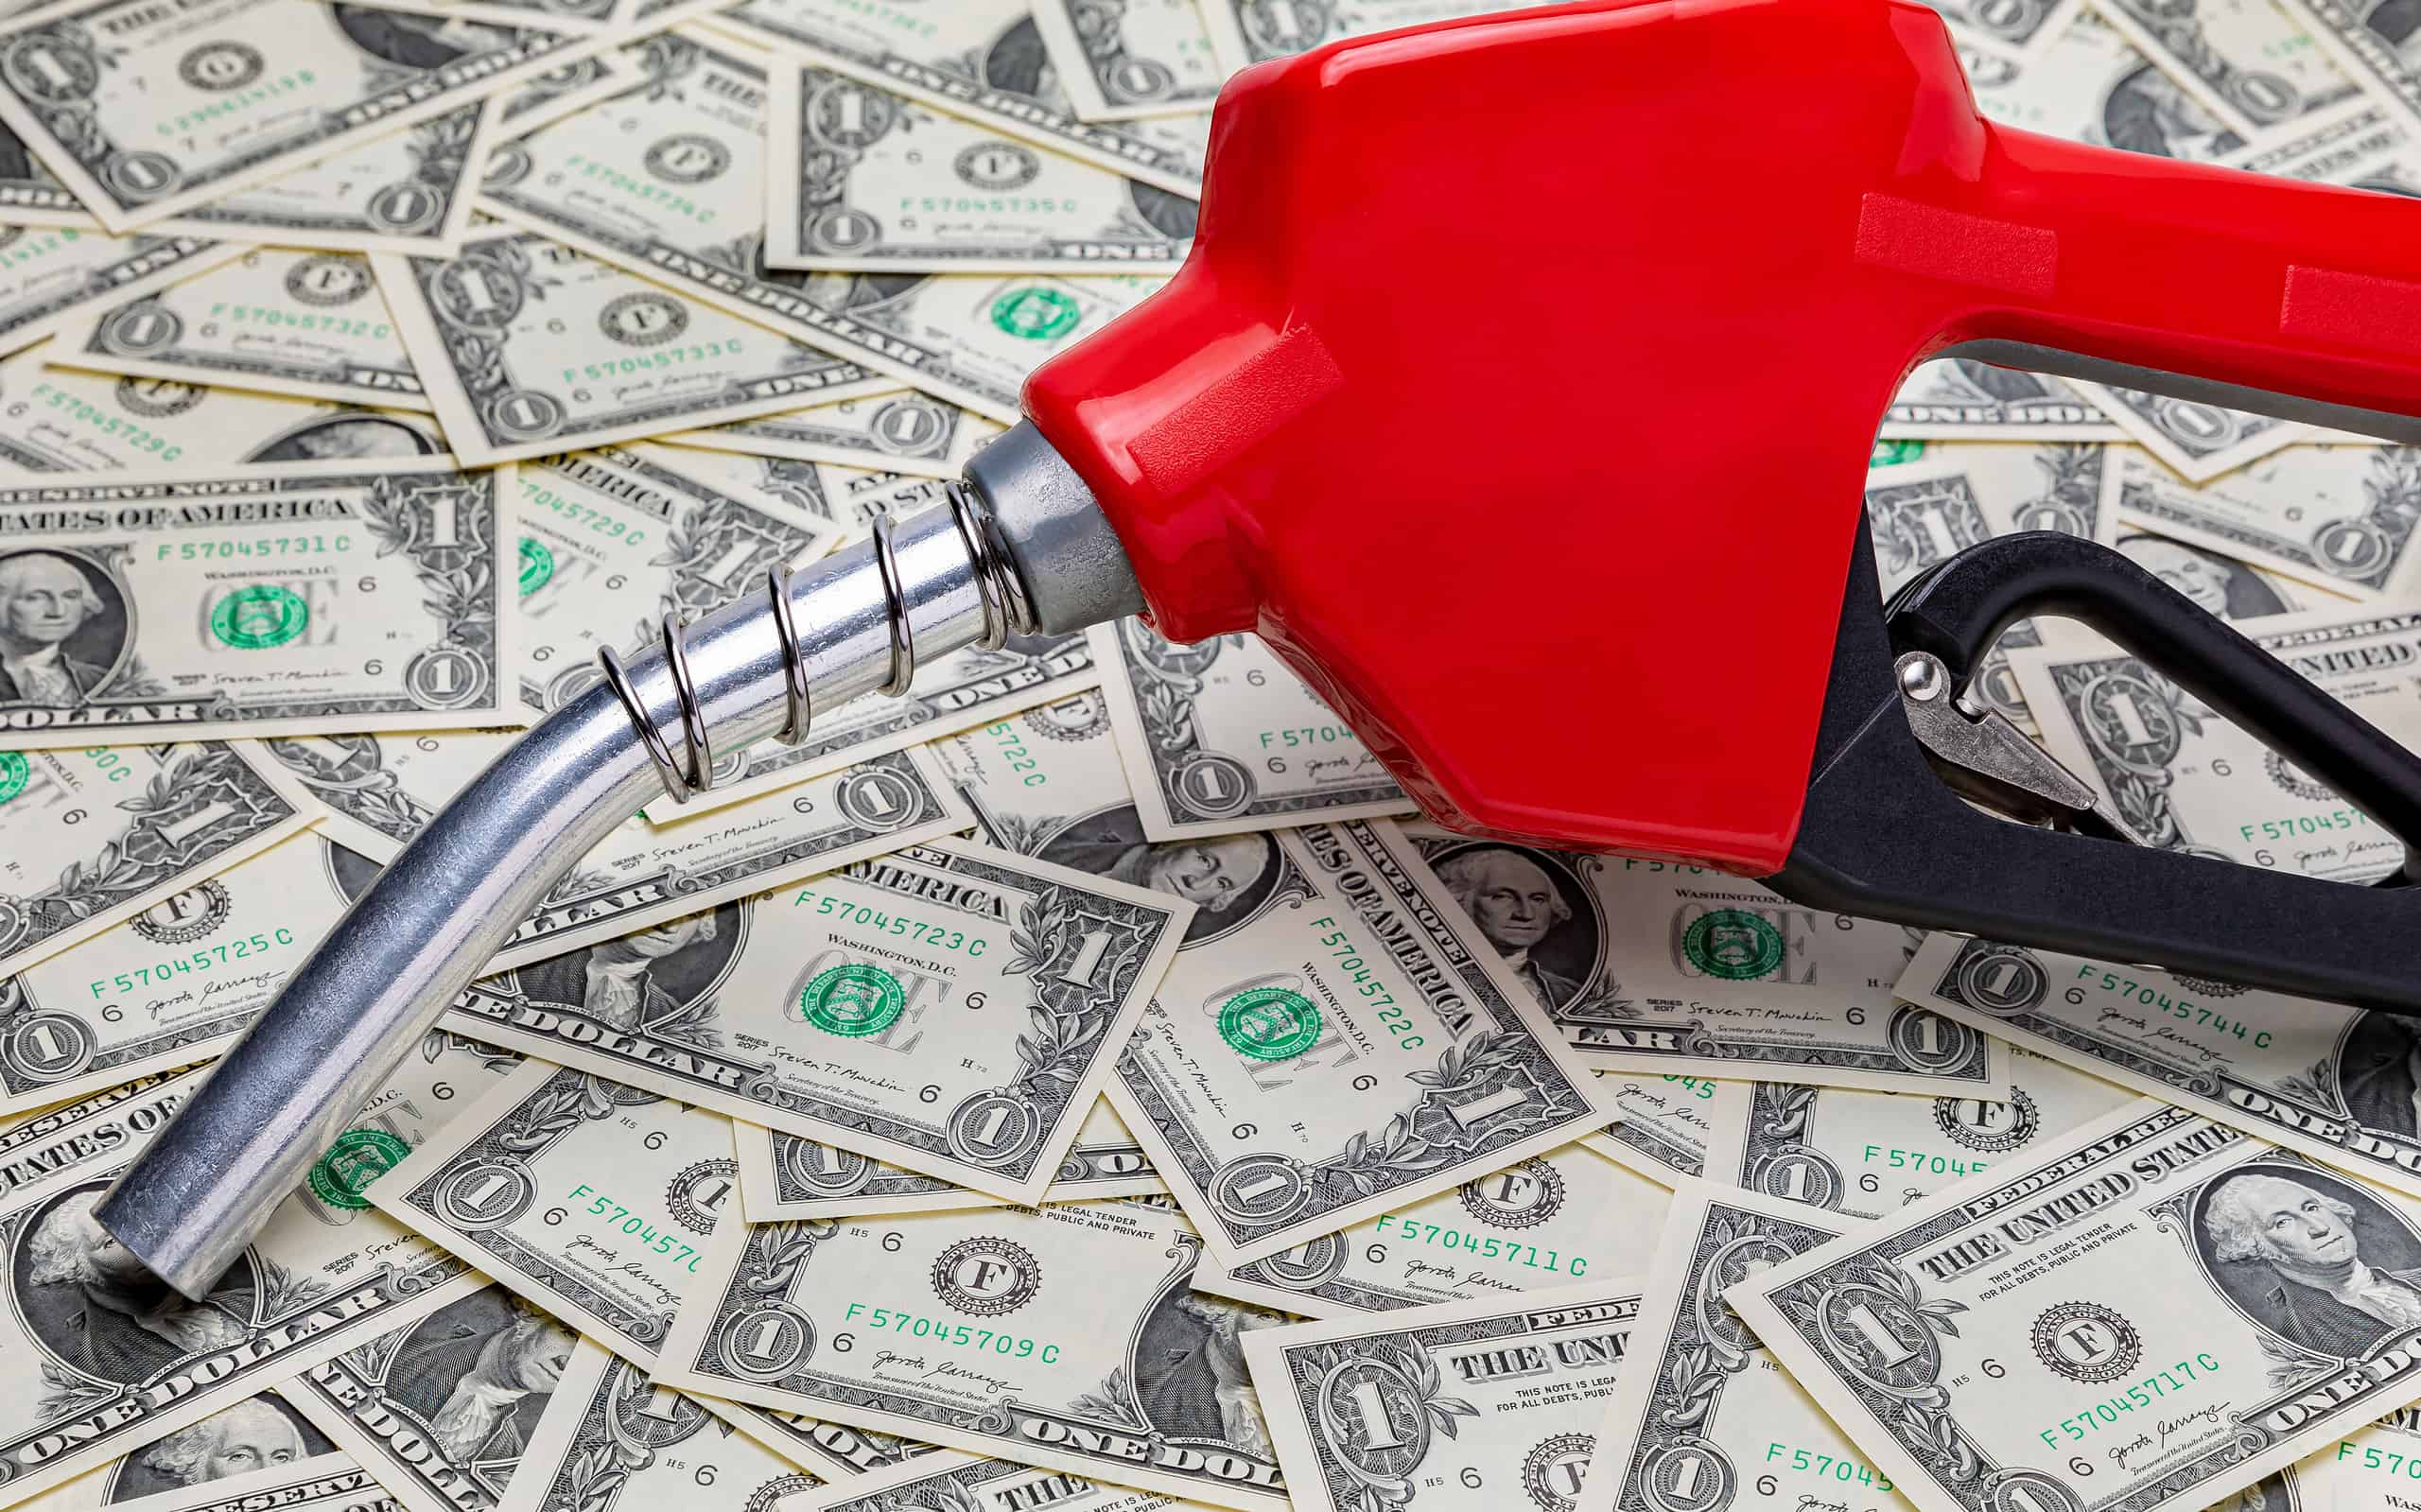 Gasoline fuel nozzle and cash money. Gas price, tax, ethanol and fossil fuel concept